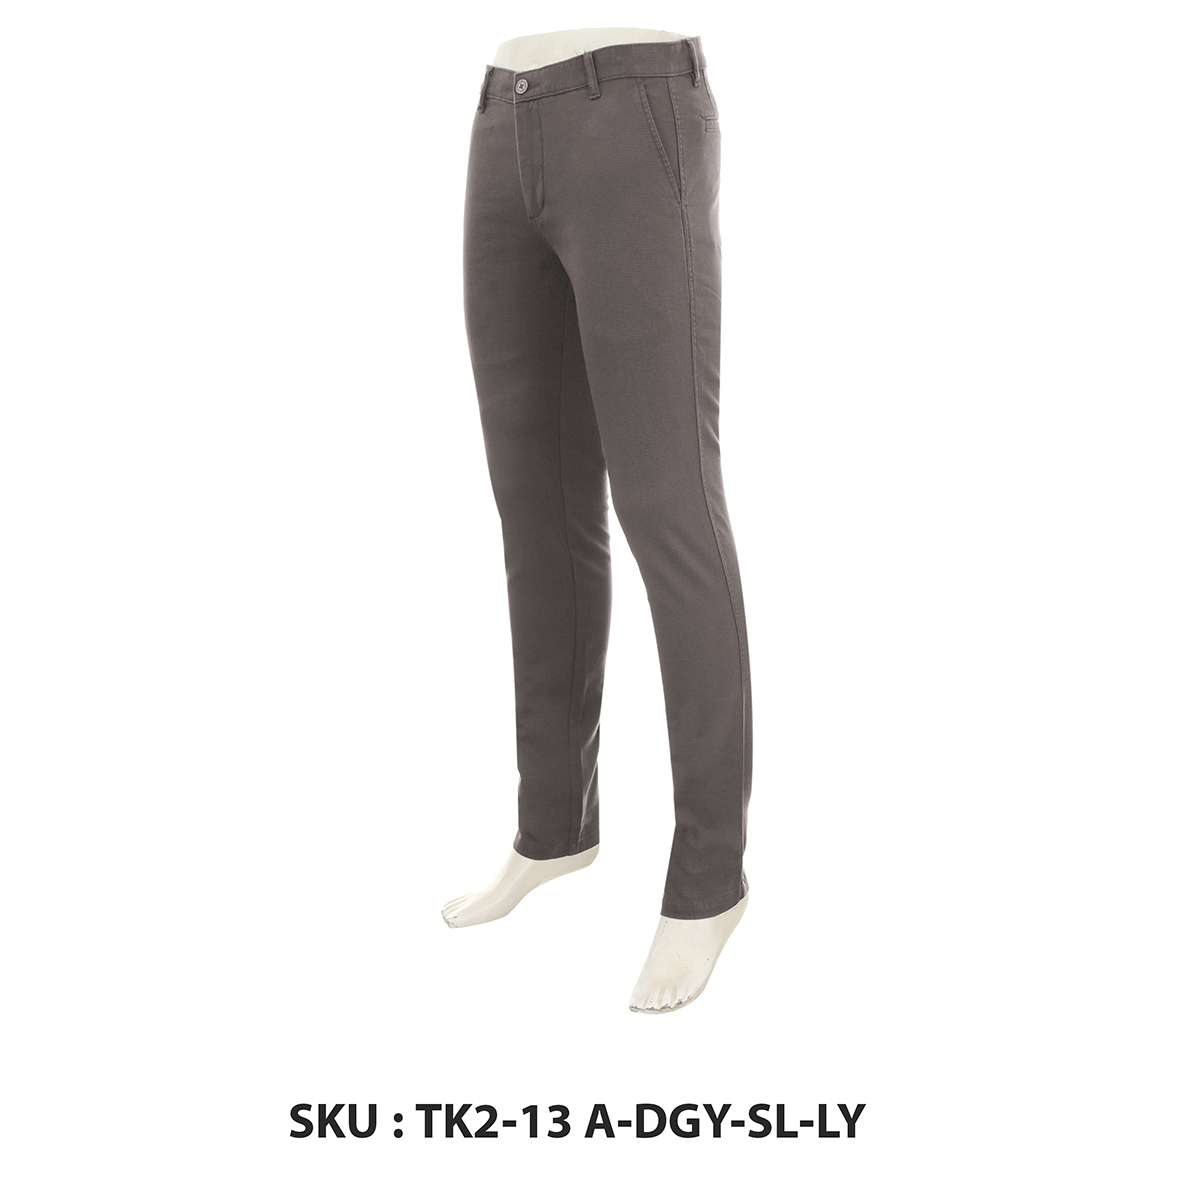 Classic Polo Mens Trousers Tk2-13 A-Dgy-Sl-Ly Grey 38